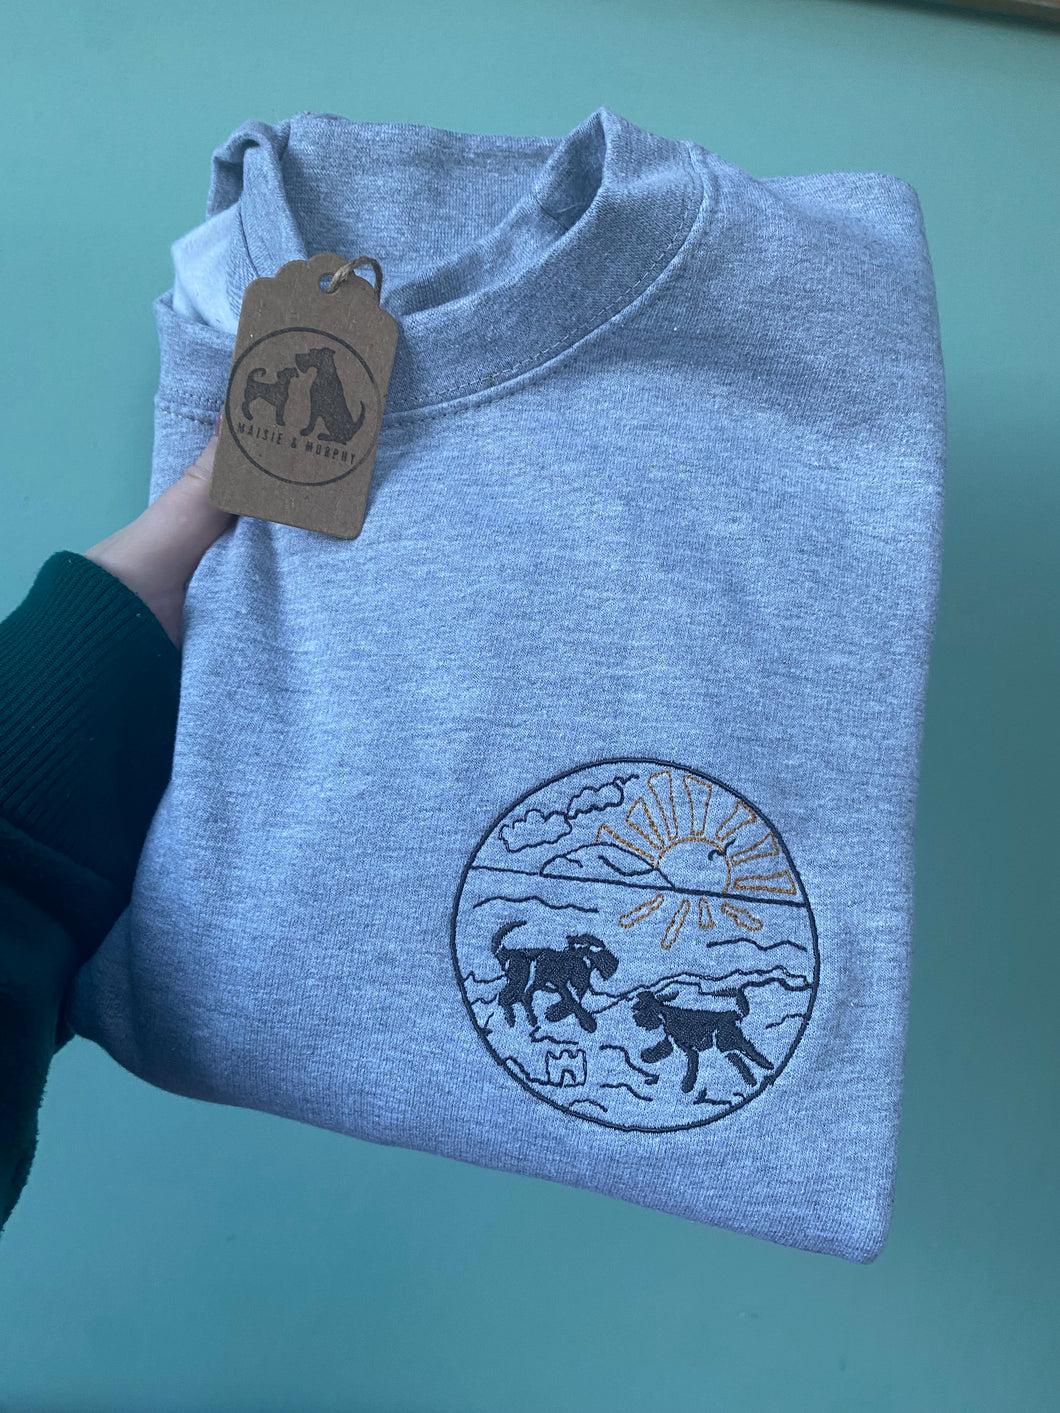 Dog Beach Sweatshirt - Embroidered sweater for dog and beach lovers